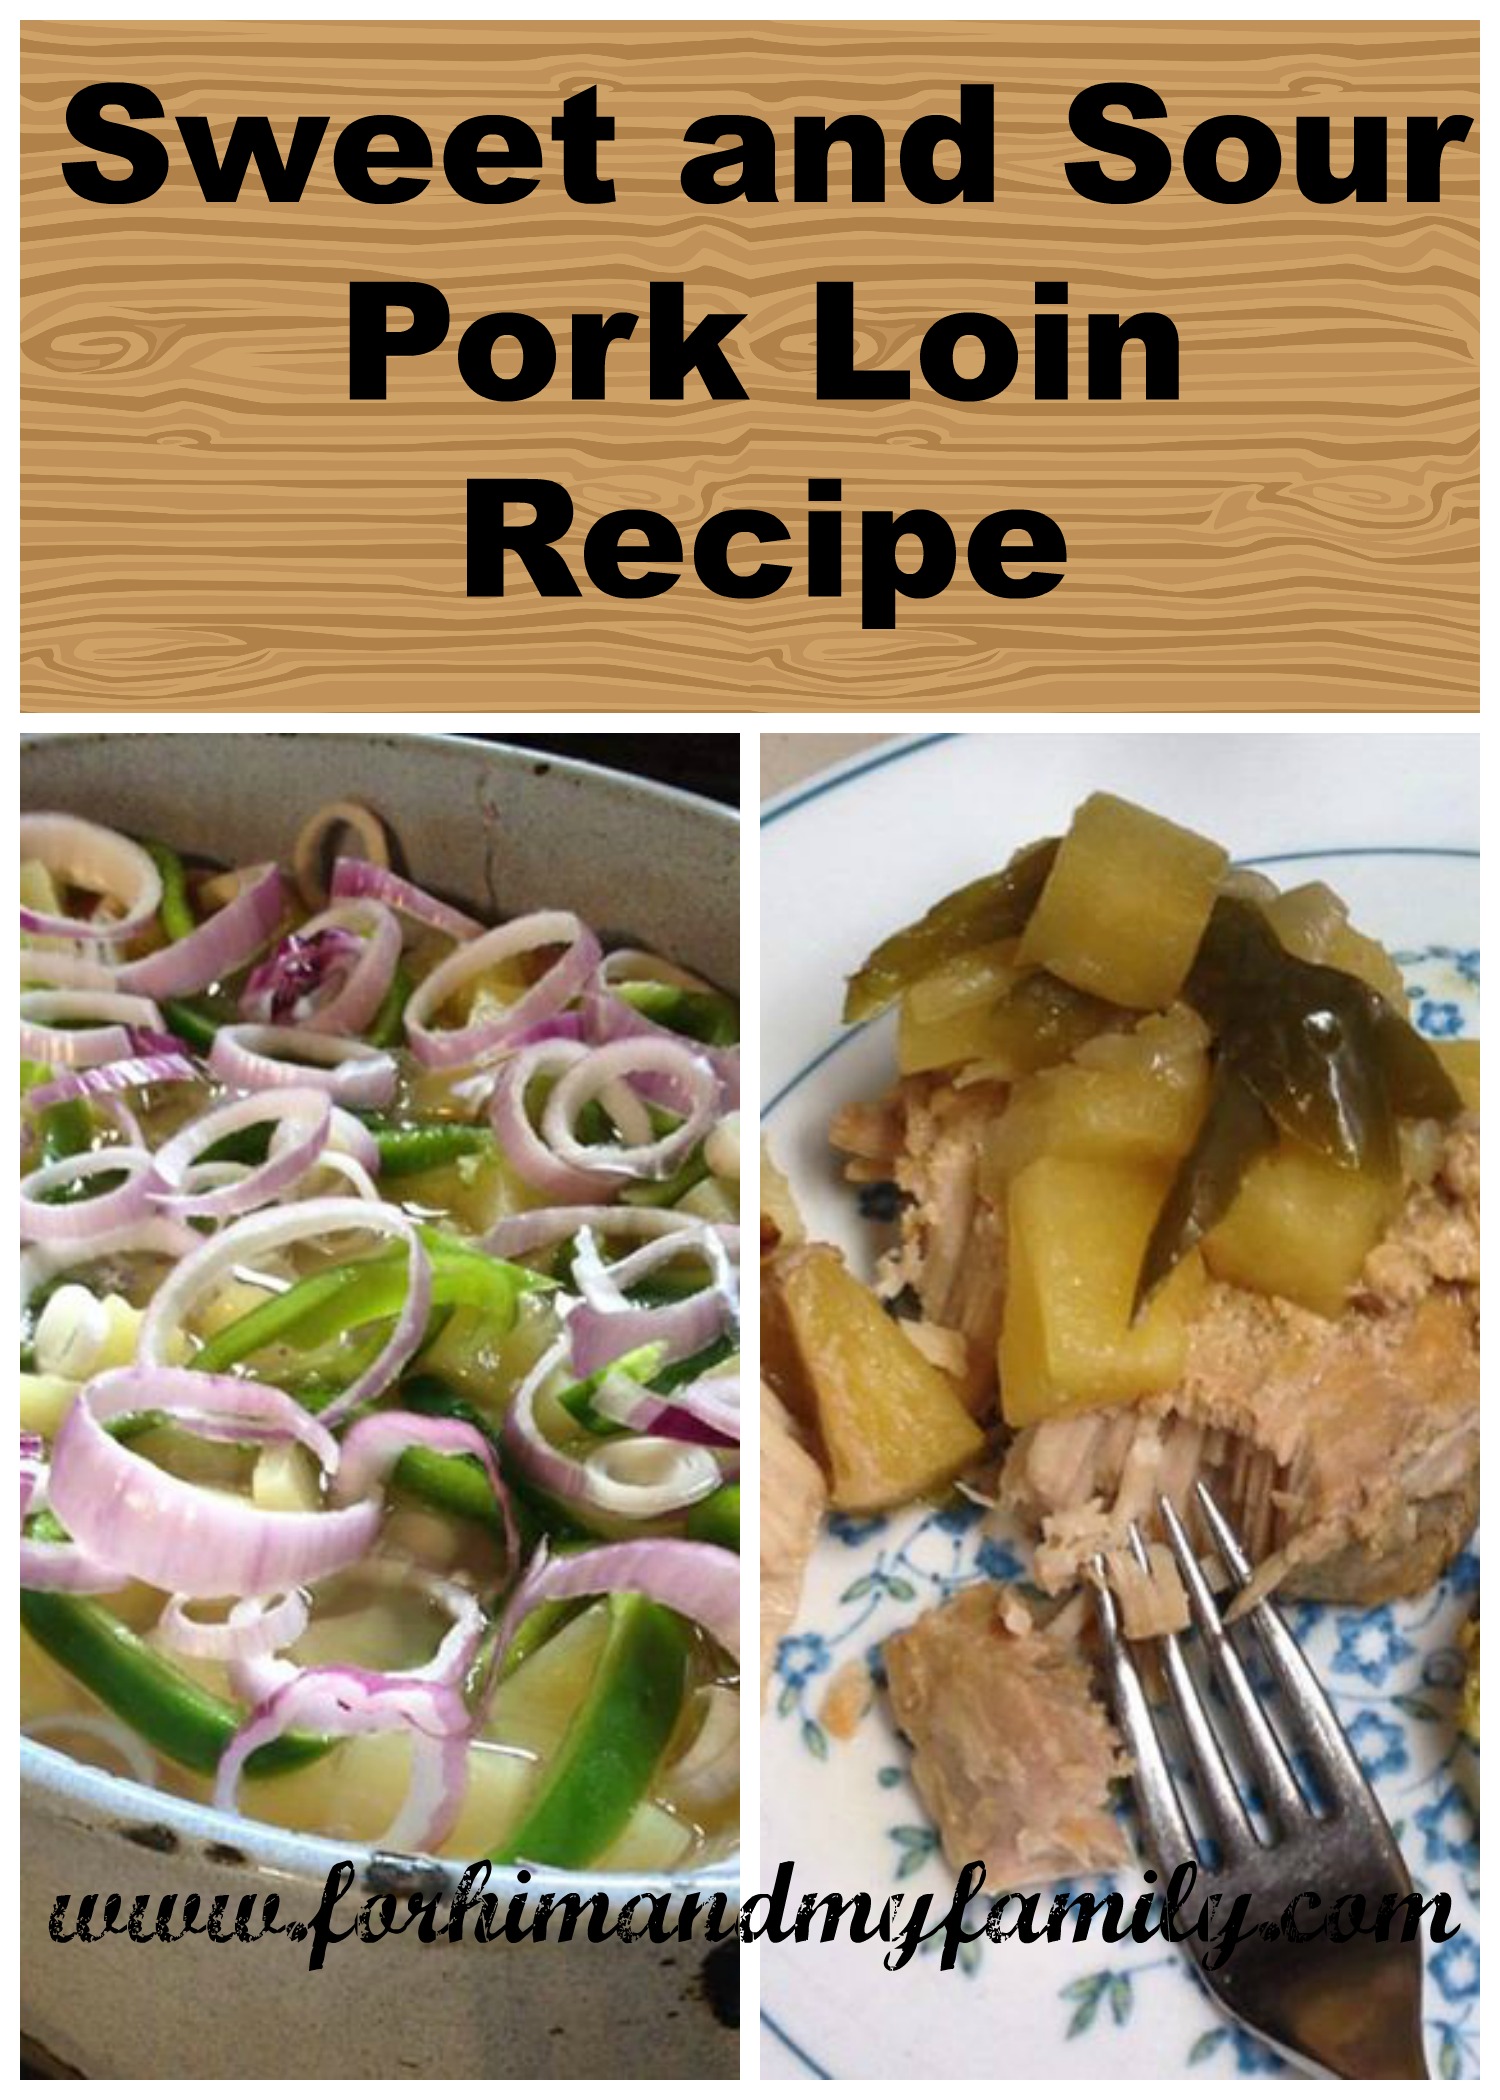 Sweet and Sour Pork Loin Recipe